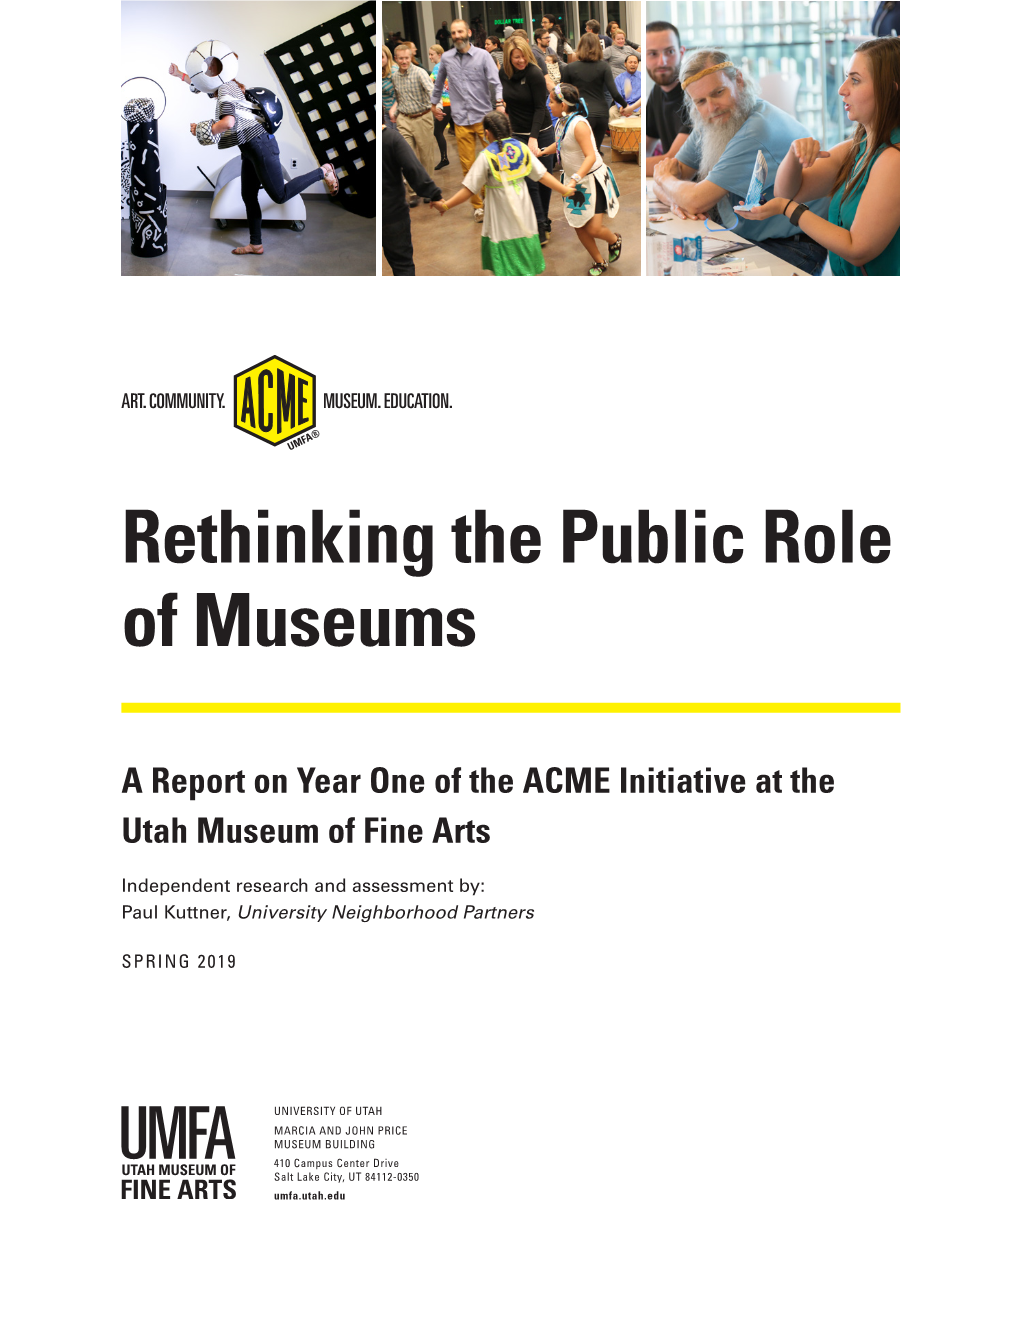 Rethinking the Public Role of Museums